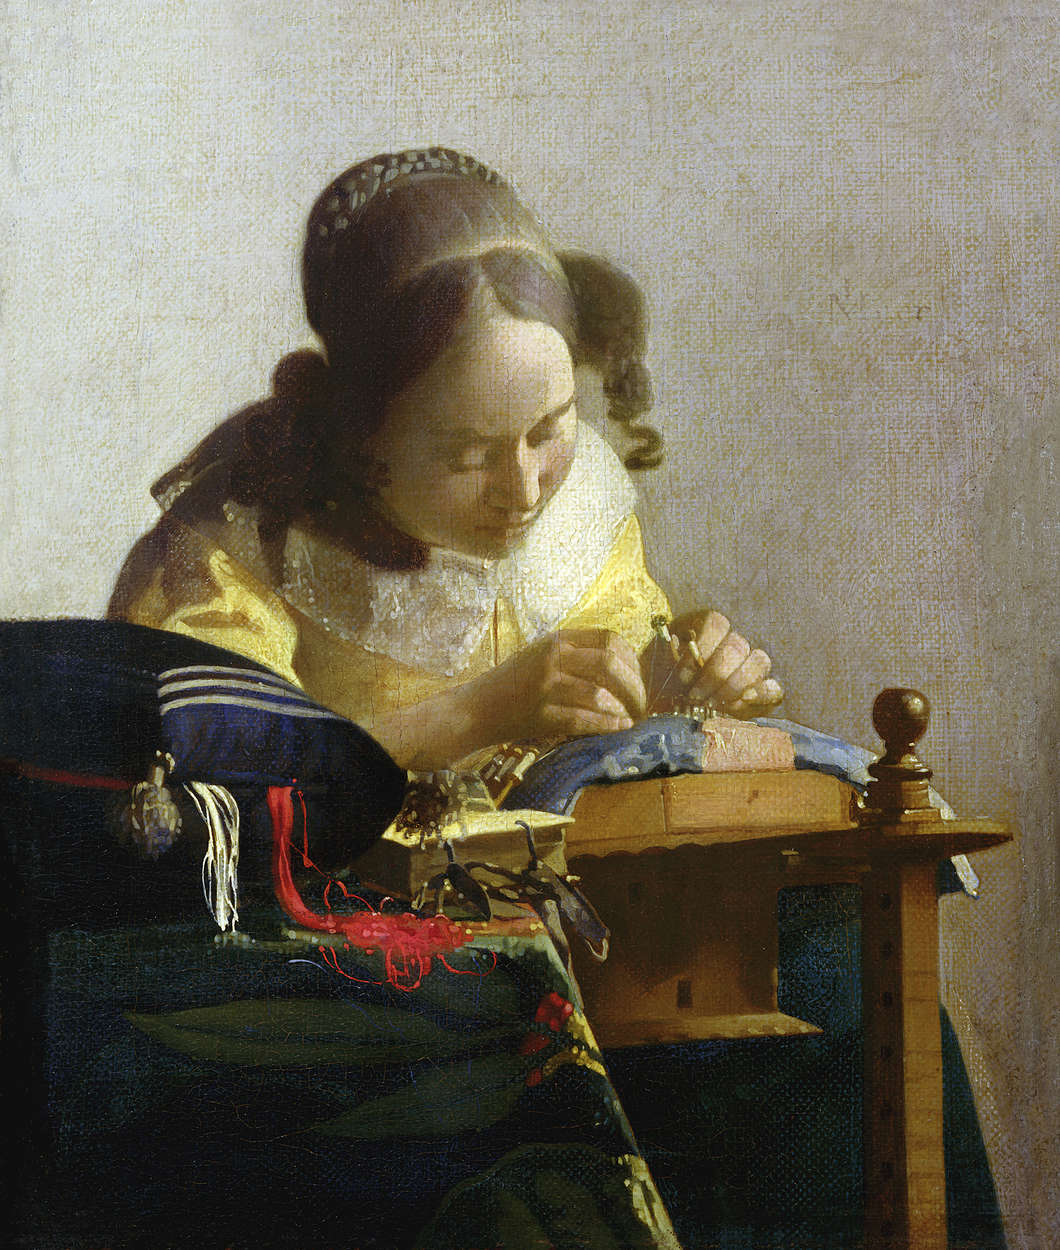             Photo wallpaper "The lace makers" by Jan Vermeer
        